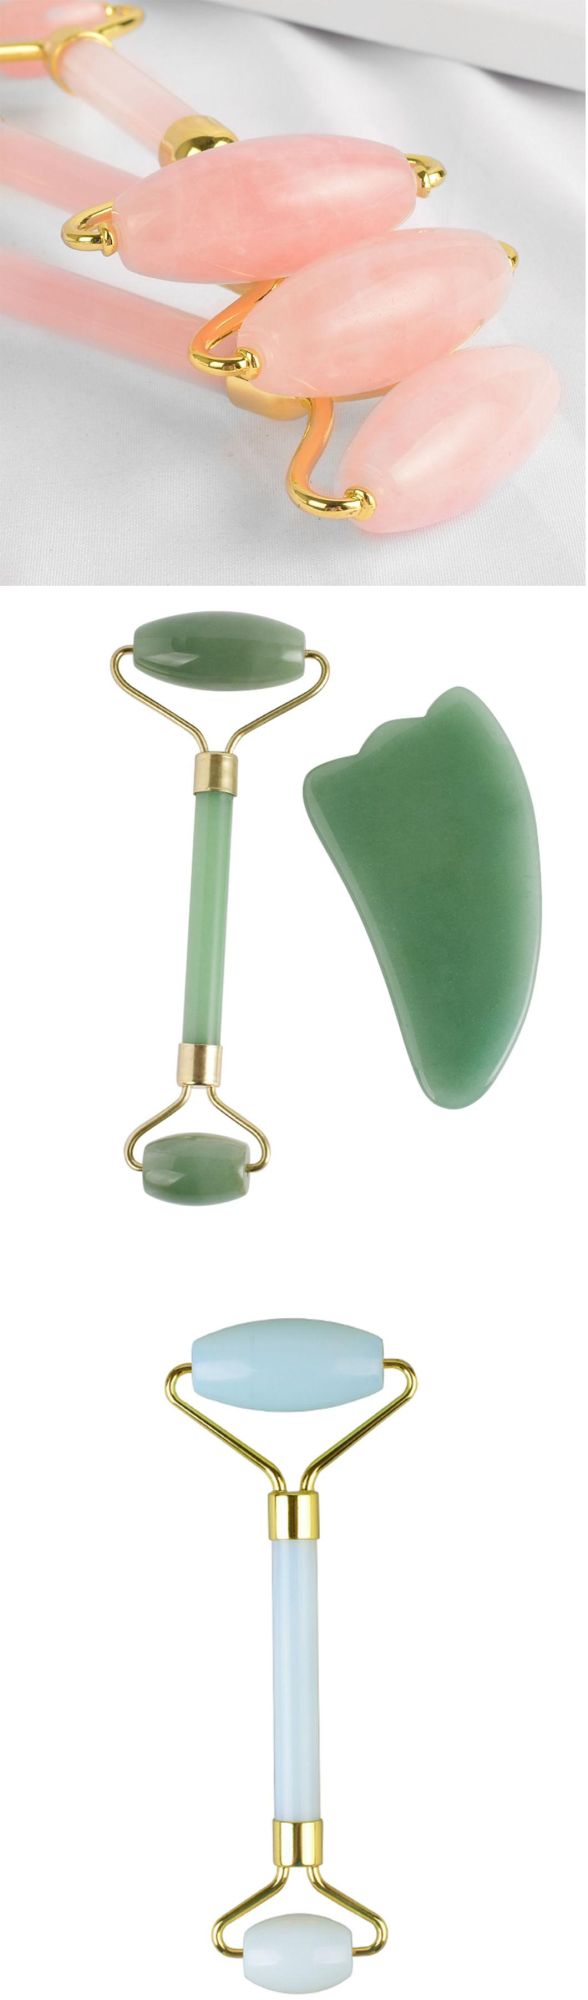 OEM High Quality Obsidian Black Gua Sha Facial Stone Private Label Jade Roller